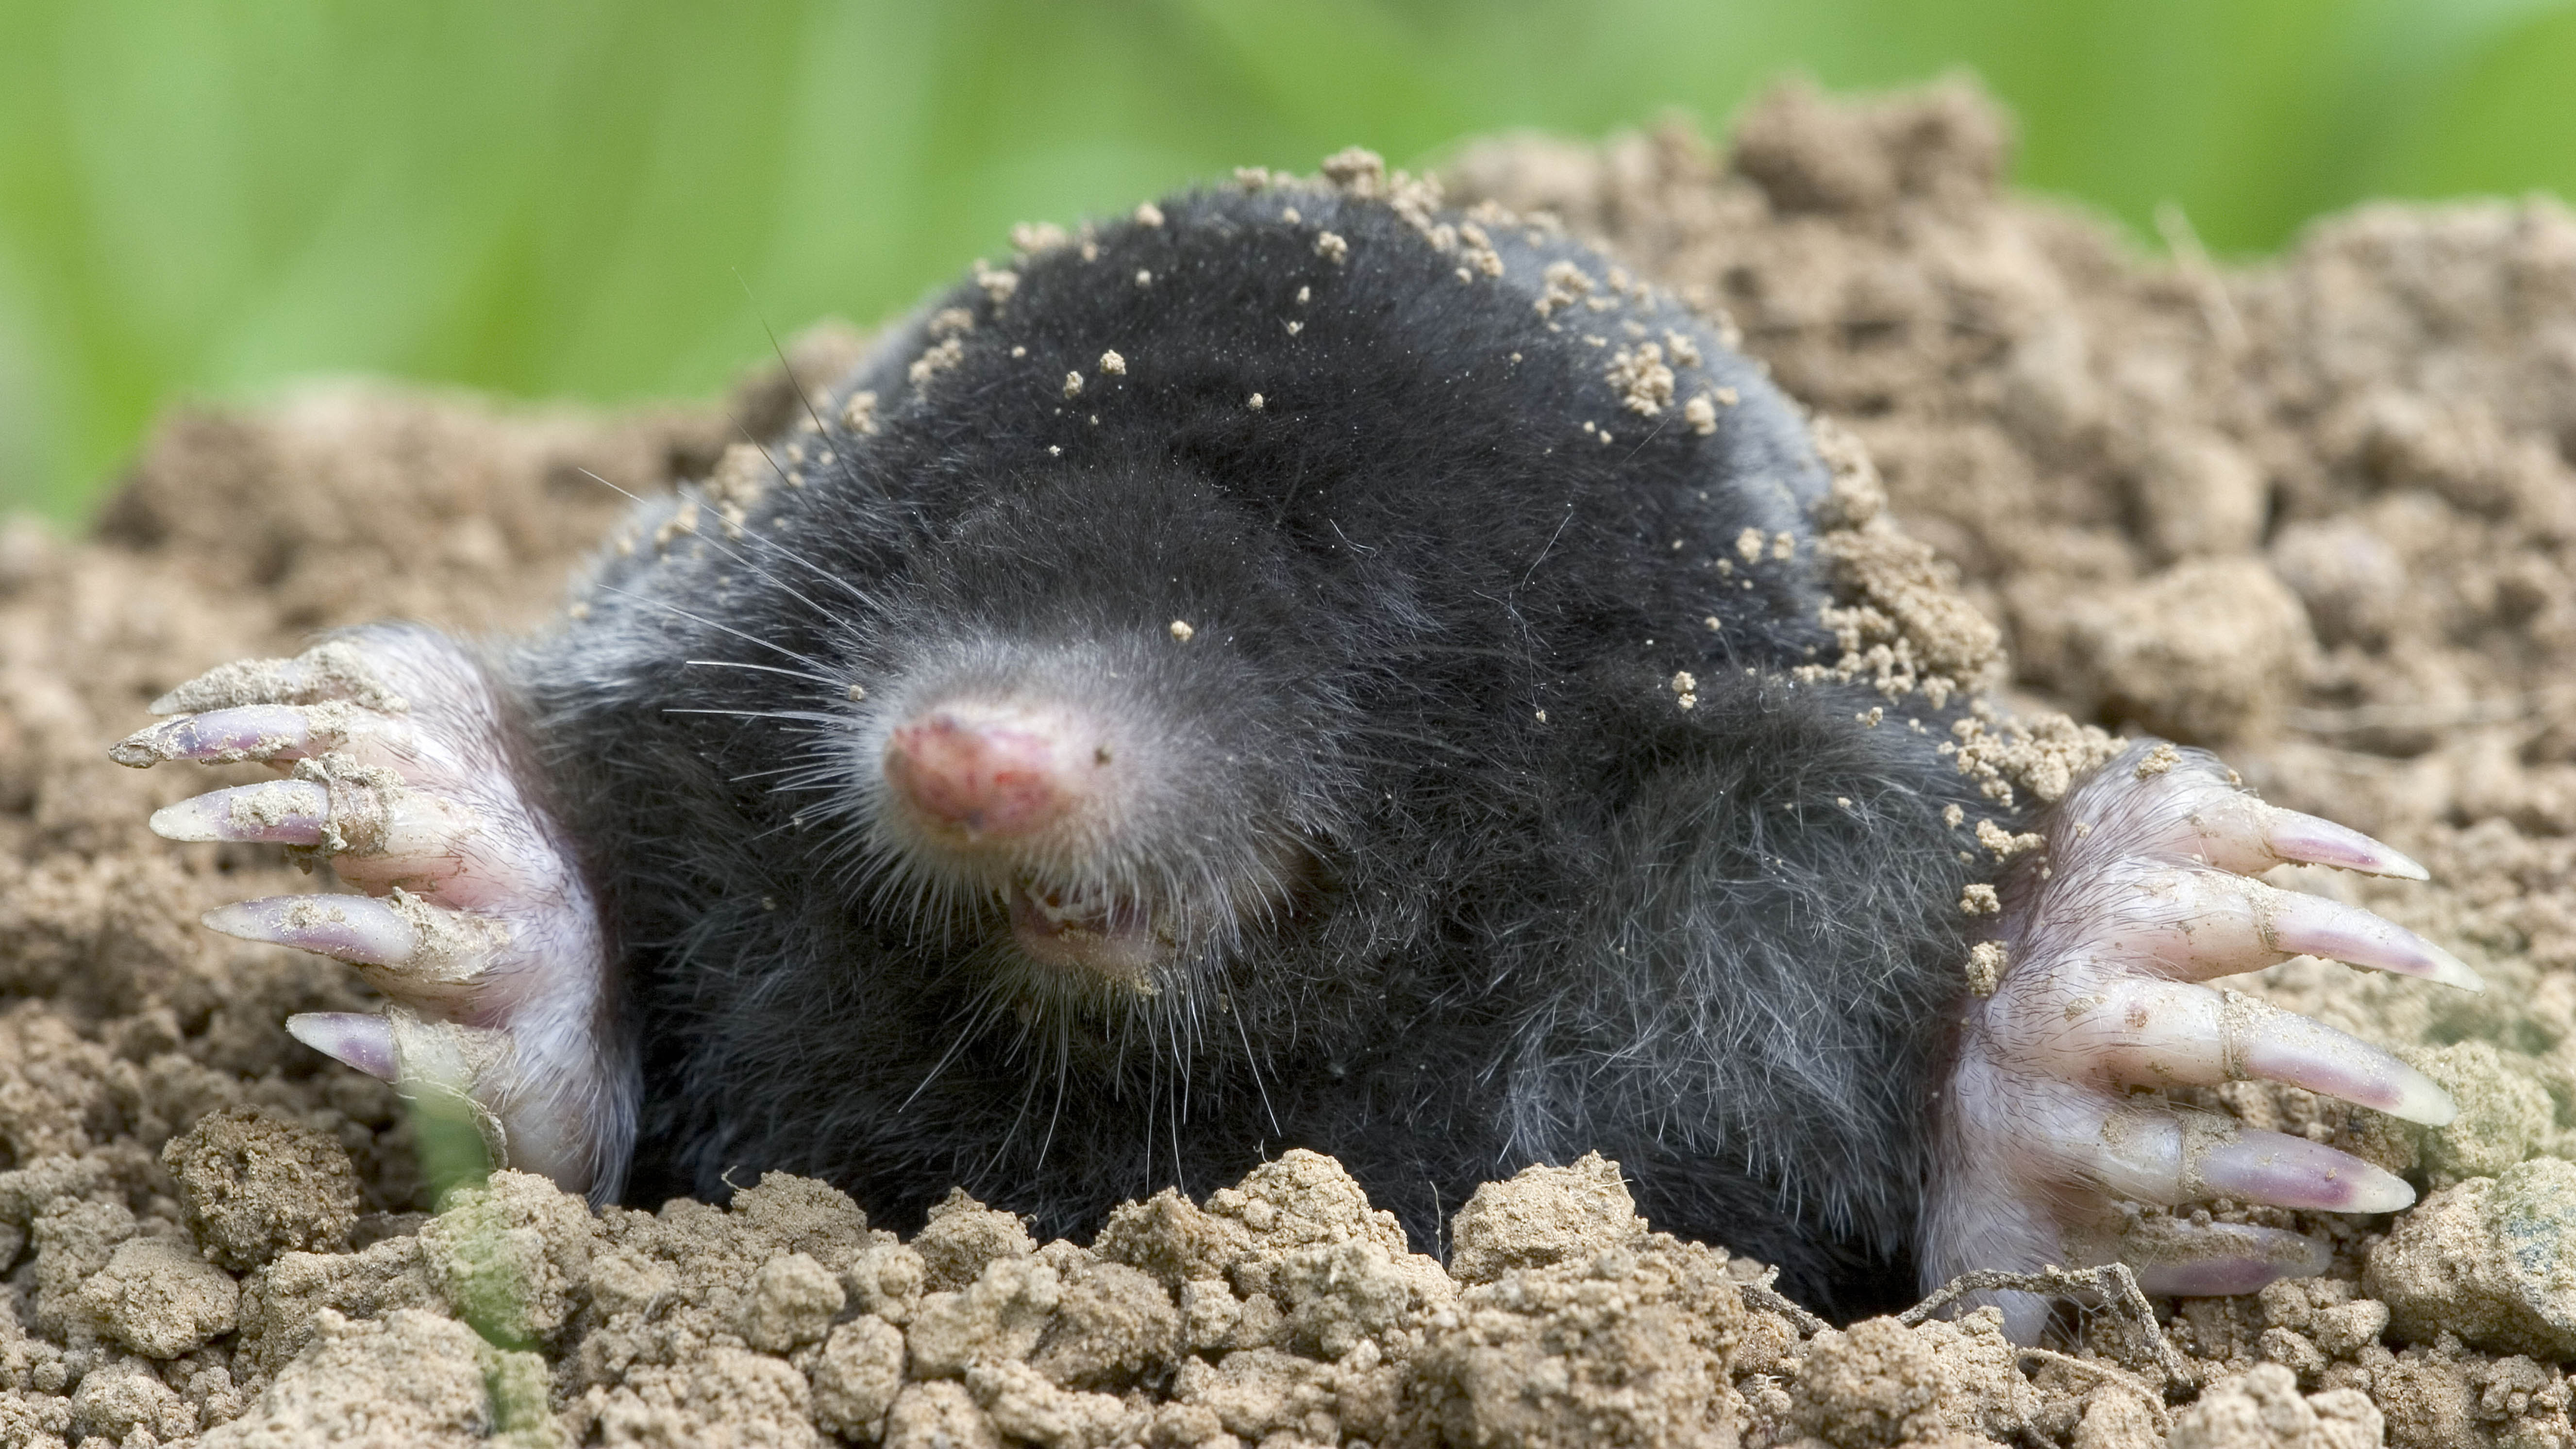 What's a Safe and Humane Way to Rid My Yard of Moles?